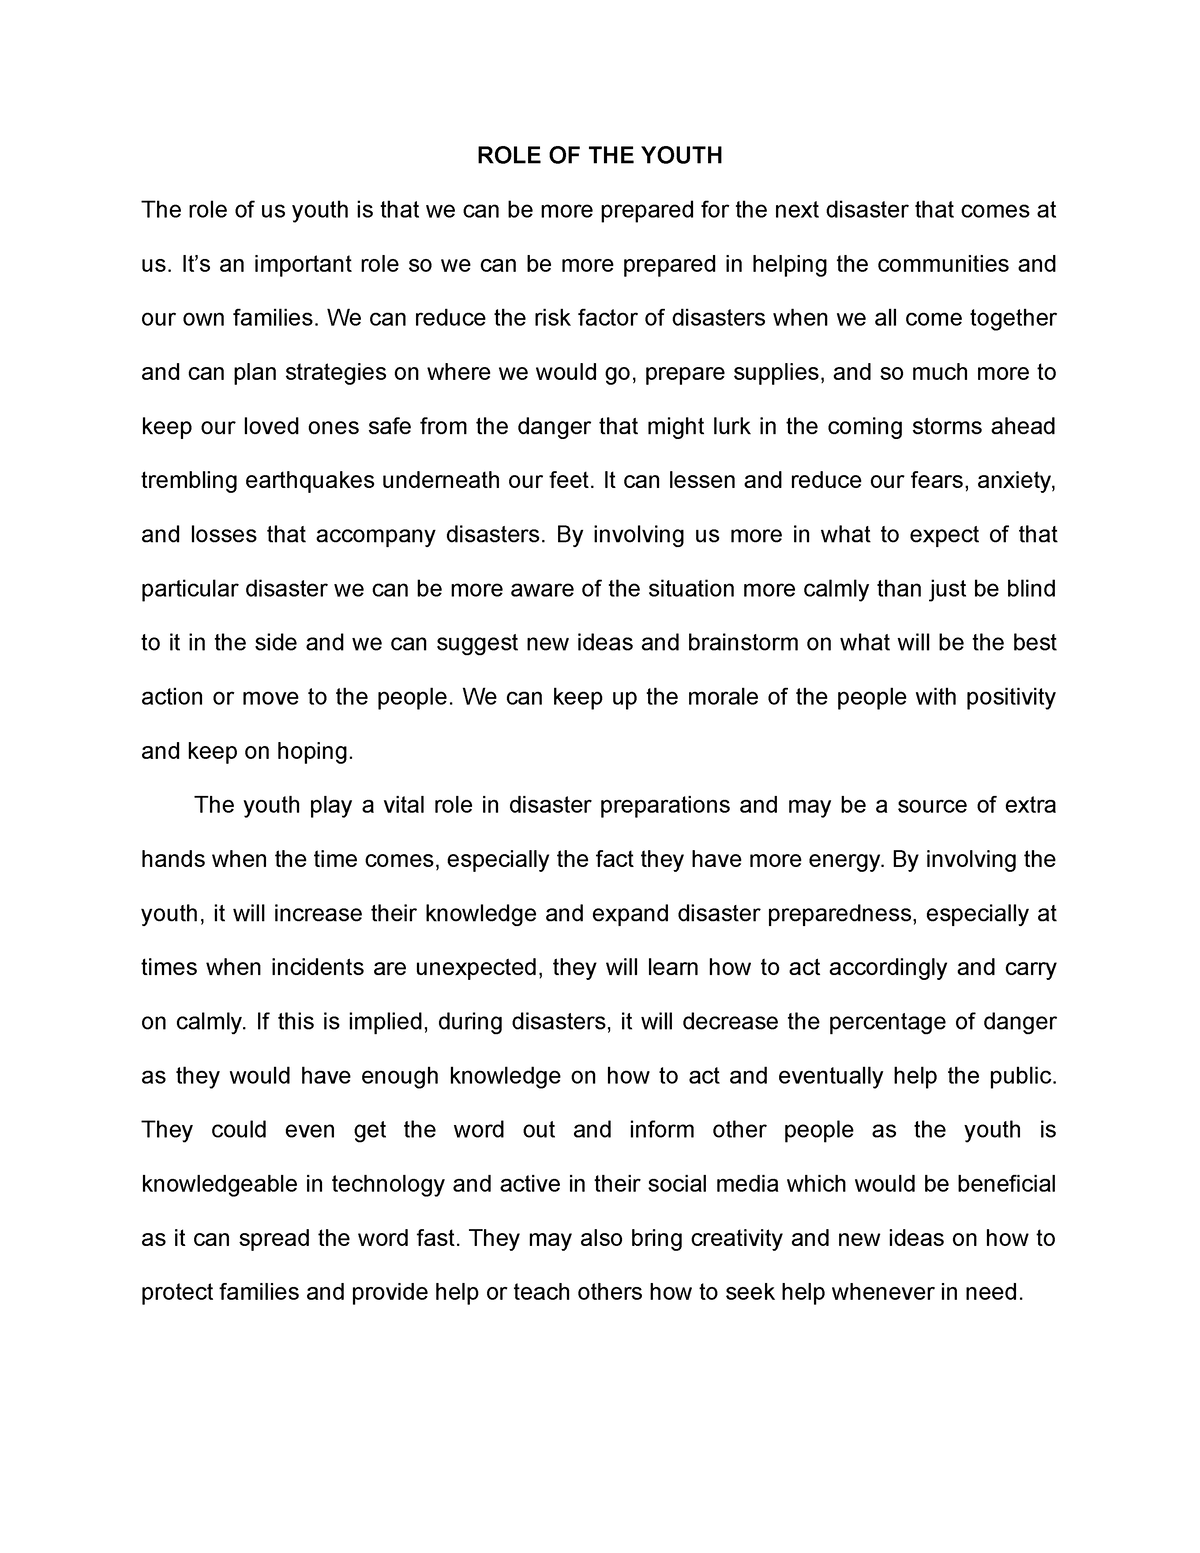 success of youth essay